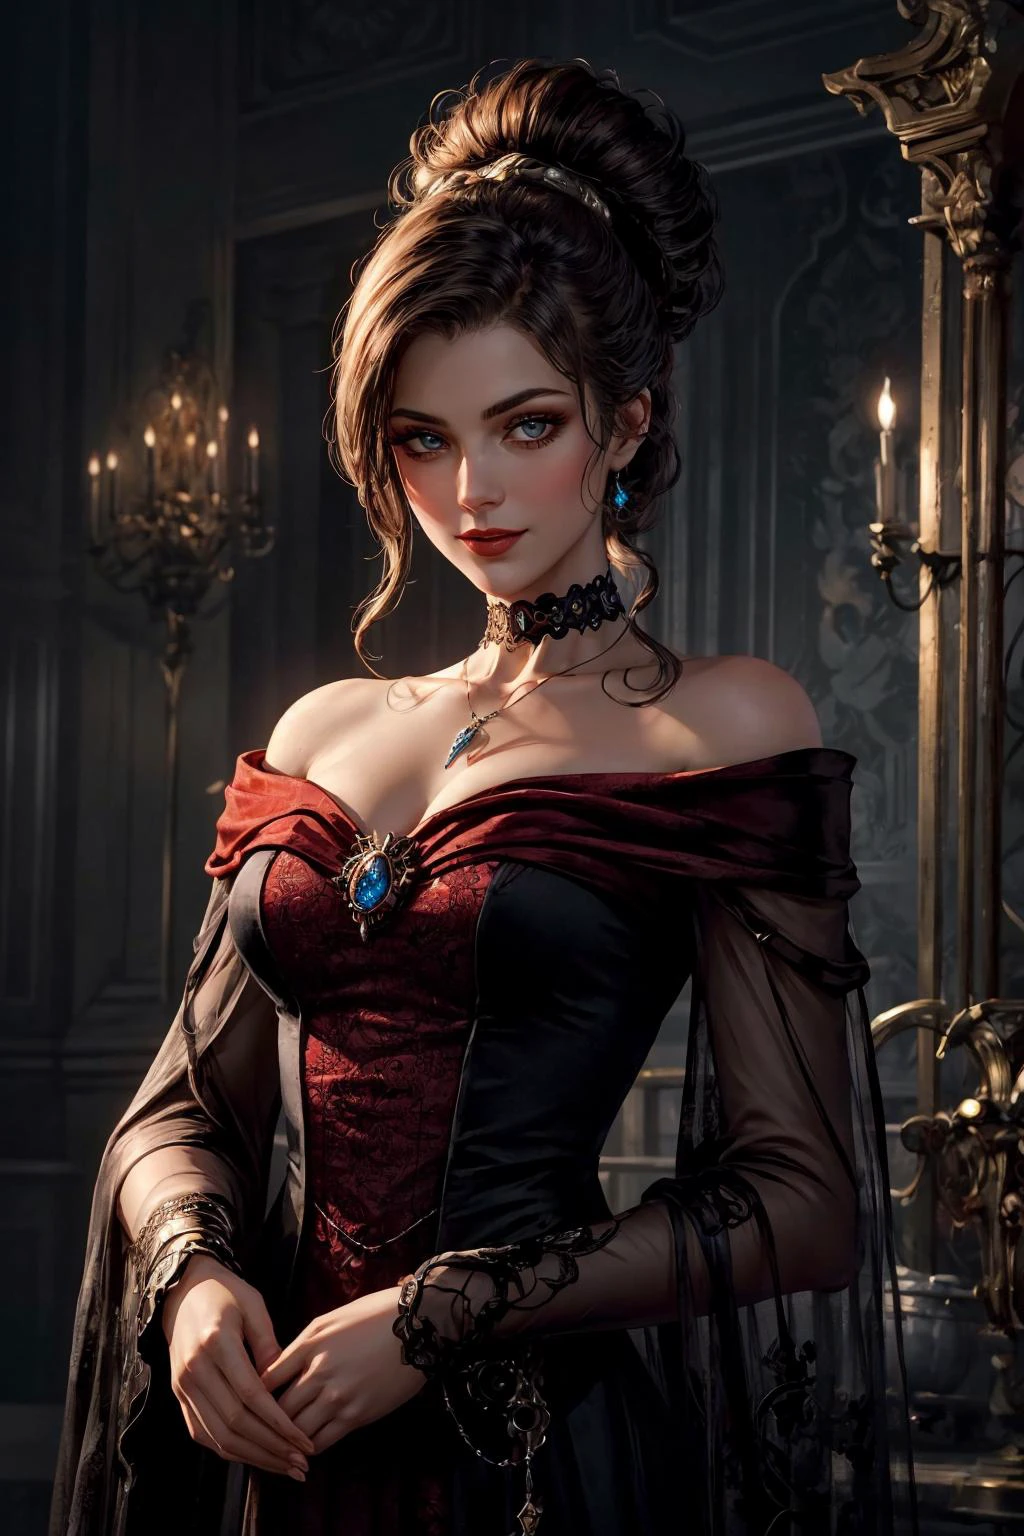 Picture a futuristic noblewoman, a scion of one of Terra's great houses, in the (grim) and (technologically grandiose) (steampunk) setting of (((Warhammer 40k))). She stands within the opulent confines of a sprawling [high-tech] futuristic [sci-fi] palace, a fusion of (Gothic architecture) and (advanced machinery), its towering obsidian spires adorned with dark banners bearing the sigil of her noble house.
The palace is a testament to the (dark majesty of technology) within this dystopian future. [Ornate, arched doorways] are not only richly decorated but equipped with (intricate mechanical locks), and the entire structure resonates with the omnipresent hum of (arcane machinery), which powers and sustains this advanced civilization.
The noblewoman herself embodies both regal grace and technological sophistication. Her attire blends decadence with power, featuring a [floor-length gown] made of [rich, dark velvet], adorned with [intricate lacework], and highlighted with [deep crimson accents].
Her [delicately arched jawline] adds to her allure, tracing the contours of [full cheeks] adorned with [subtle blush], a hint of secrets and passions. [Exquisite features], a [long, inviting chin], and [graceful cheekbones] harmonize with her [nose, slightly upturned at the tip], adding to her allure and a warm, shy smile. Her [parted lips], as alluring as pomegranate, with [pearly white teeth], [smiling shyly], her natural beauty complemented by [tinted lip balm].
Her eyes hold a [hypnotic gaze], the [rich brown] of her irises set against [white sclera]. [Elegantly curved eyebrows], [long, inviting eyelashes], and [subtle eyeshadow] hint at a life steeped in shadows.
Around her neck, she wears a [lace choker] with a pendant bearing the emblem of her house, a symbol of her noble lineage. Her [raven-black hair], elegantly coiffed, cascades down, held in place by [ornate hairpins] featuring her family's crest.
Her [alabaster skin] is untouched by the ravages of time, and her [intelligent gaze] holds the weight of centuries of imperial rule. She carries herself with a [haughty demeanor], a testament to her noble heritage.
The palace's grand halls are illuminated by [edison bulb], casting flickering shadows on the colossal tapestries and [priceless artworks] that adorn the walls. The air is heavy with the scent of [incense] and [subtle perfumes], masking the stench of the polluted world outside.
Here, [arcane machinery] seamlessly intertwines with the Gothic architecture, serving as a testament to both the grandeur and technological prowess of this dark future.
This is a glimpse into the opulent and shadowed world of Warhammer 40k's noble elite, where a noblewoman of Terra's great houses stands as a symbol of power and decadence in an era marked by unending war and darkness, all within the backdrop of a gothic realm adorned with (advanced technology) 